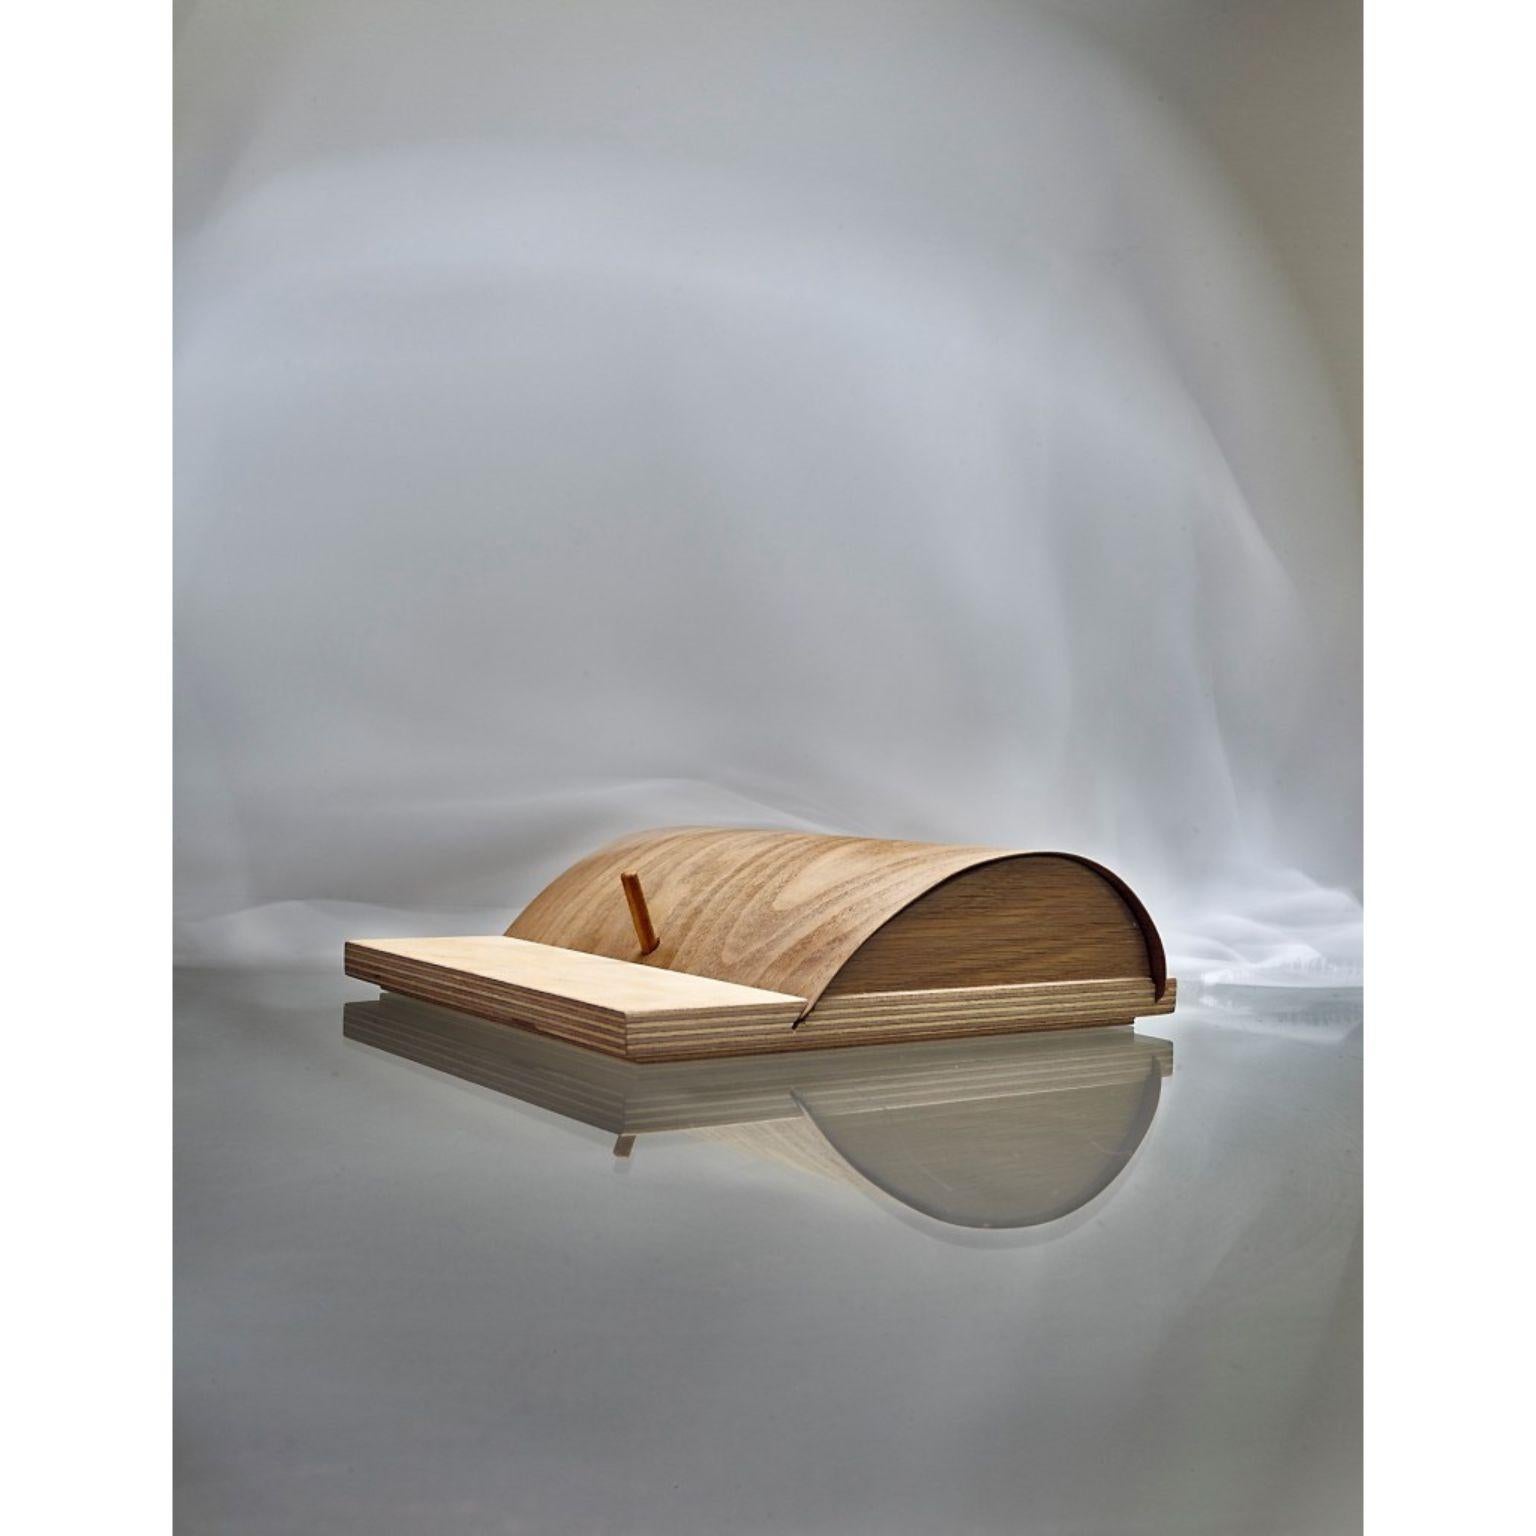 Luna box by Jean-Baptiste Van den Heede
Signed, Limited edition
Dimensions: L 22 x W 20 x H 6 cm
Materials: Birch, oak and elm plywood

LUNA is an author design with elegant curves especially for lovers and collectors of boxes. Birch, oak and